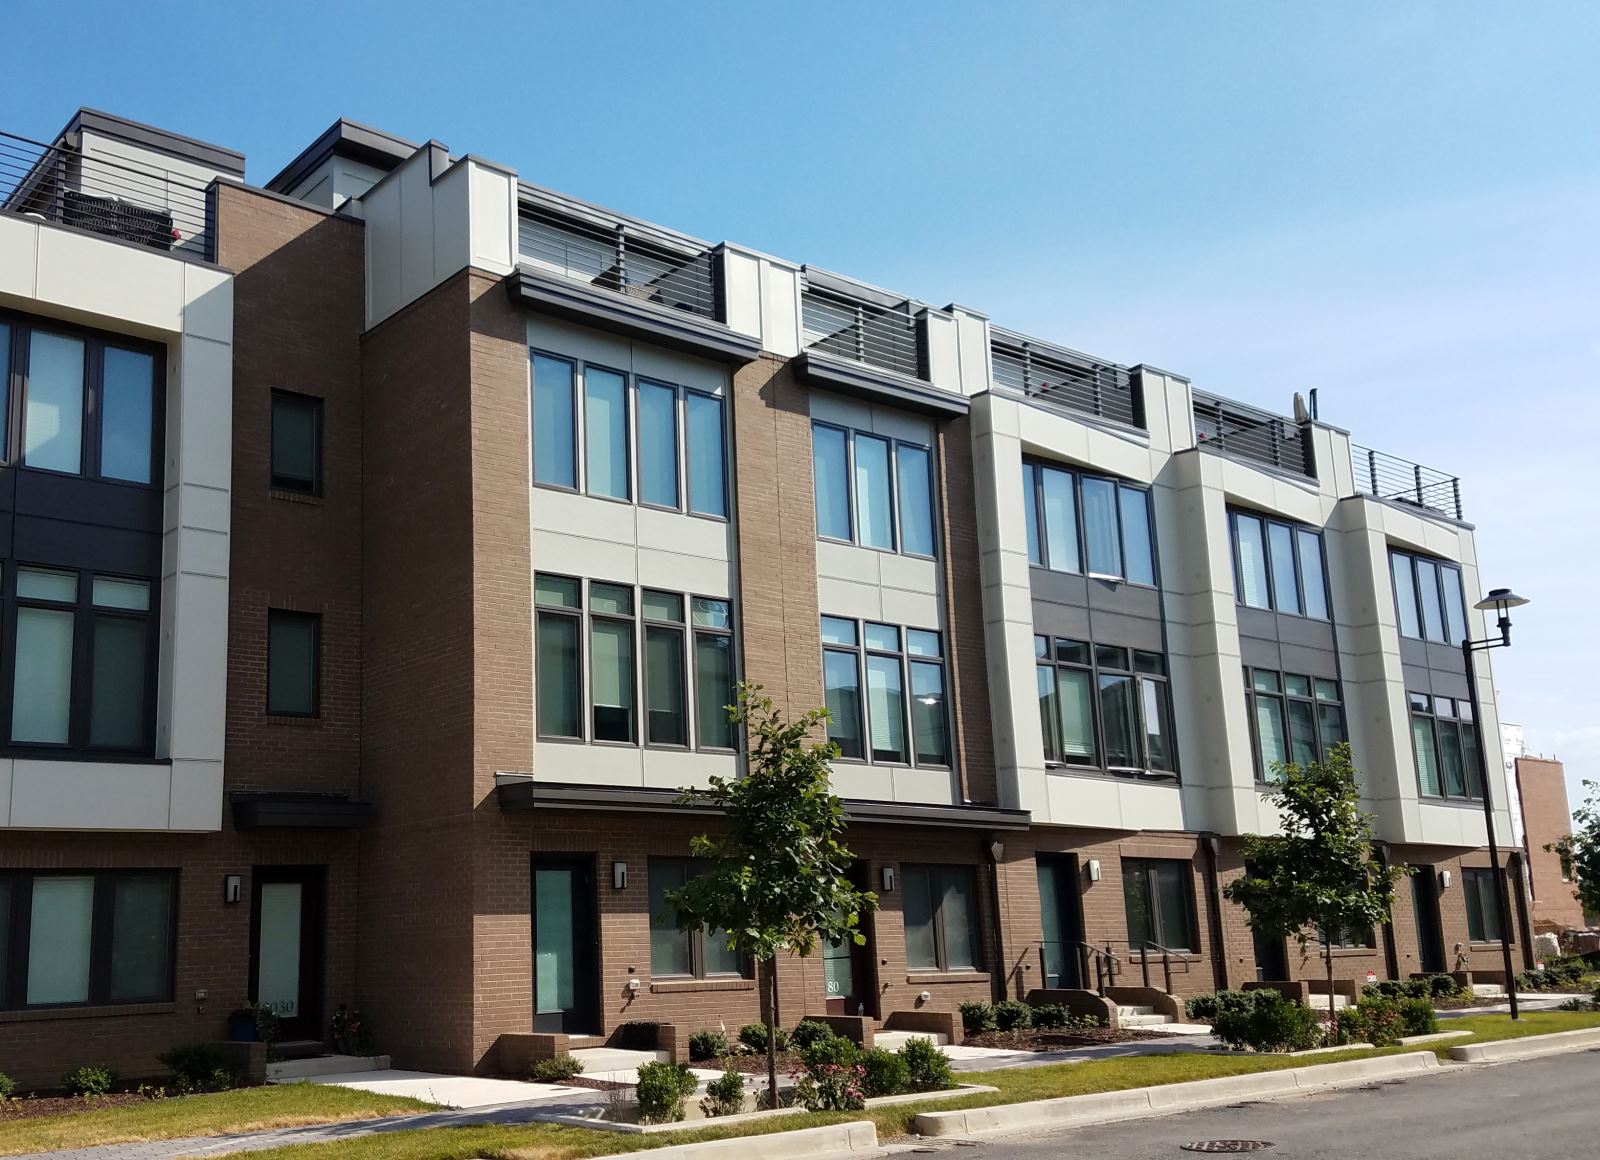 Completed Townhomes, July 2018